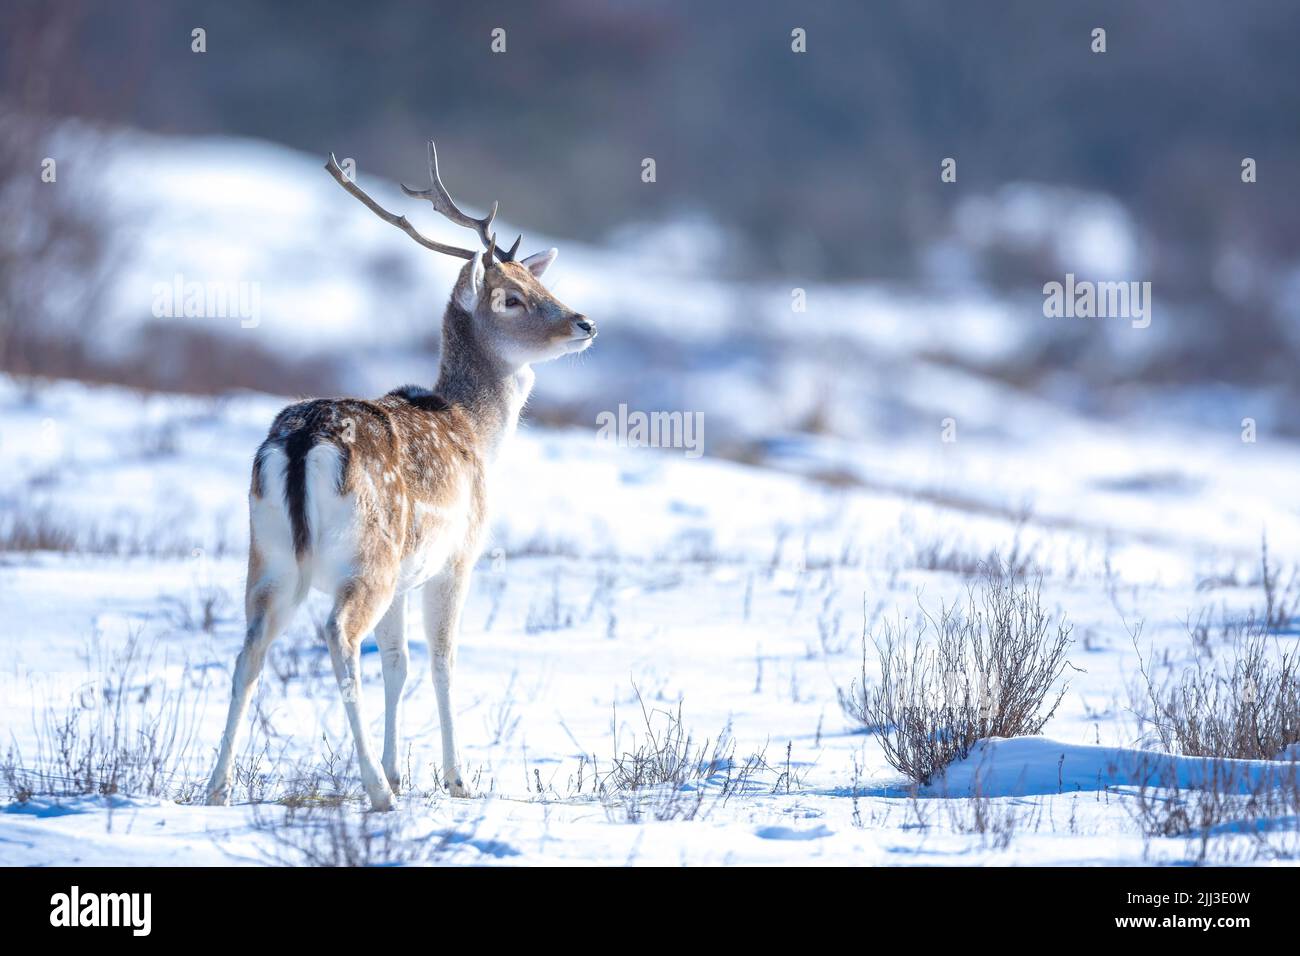 Fallow deer stag Dama Dama foraging in Winter forest snow and ice, selective focus is used. Stock Photo